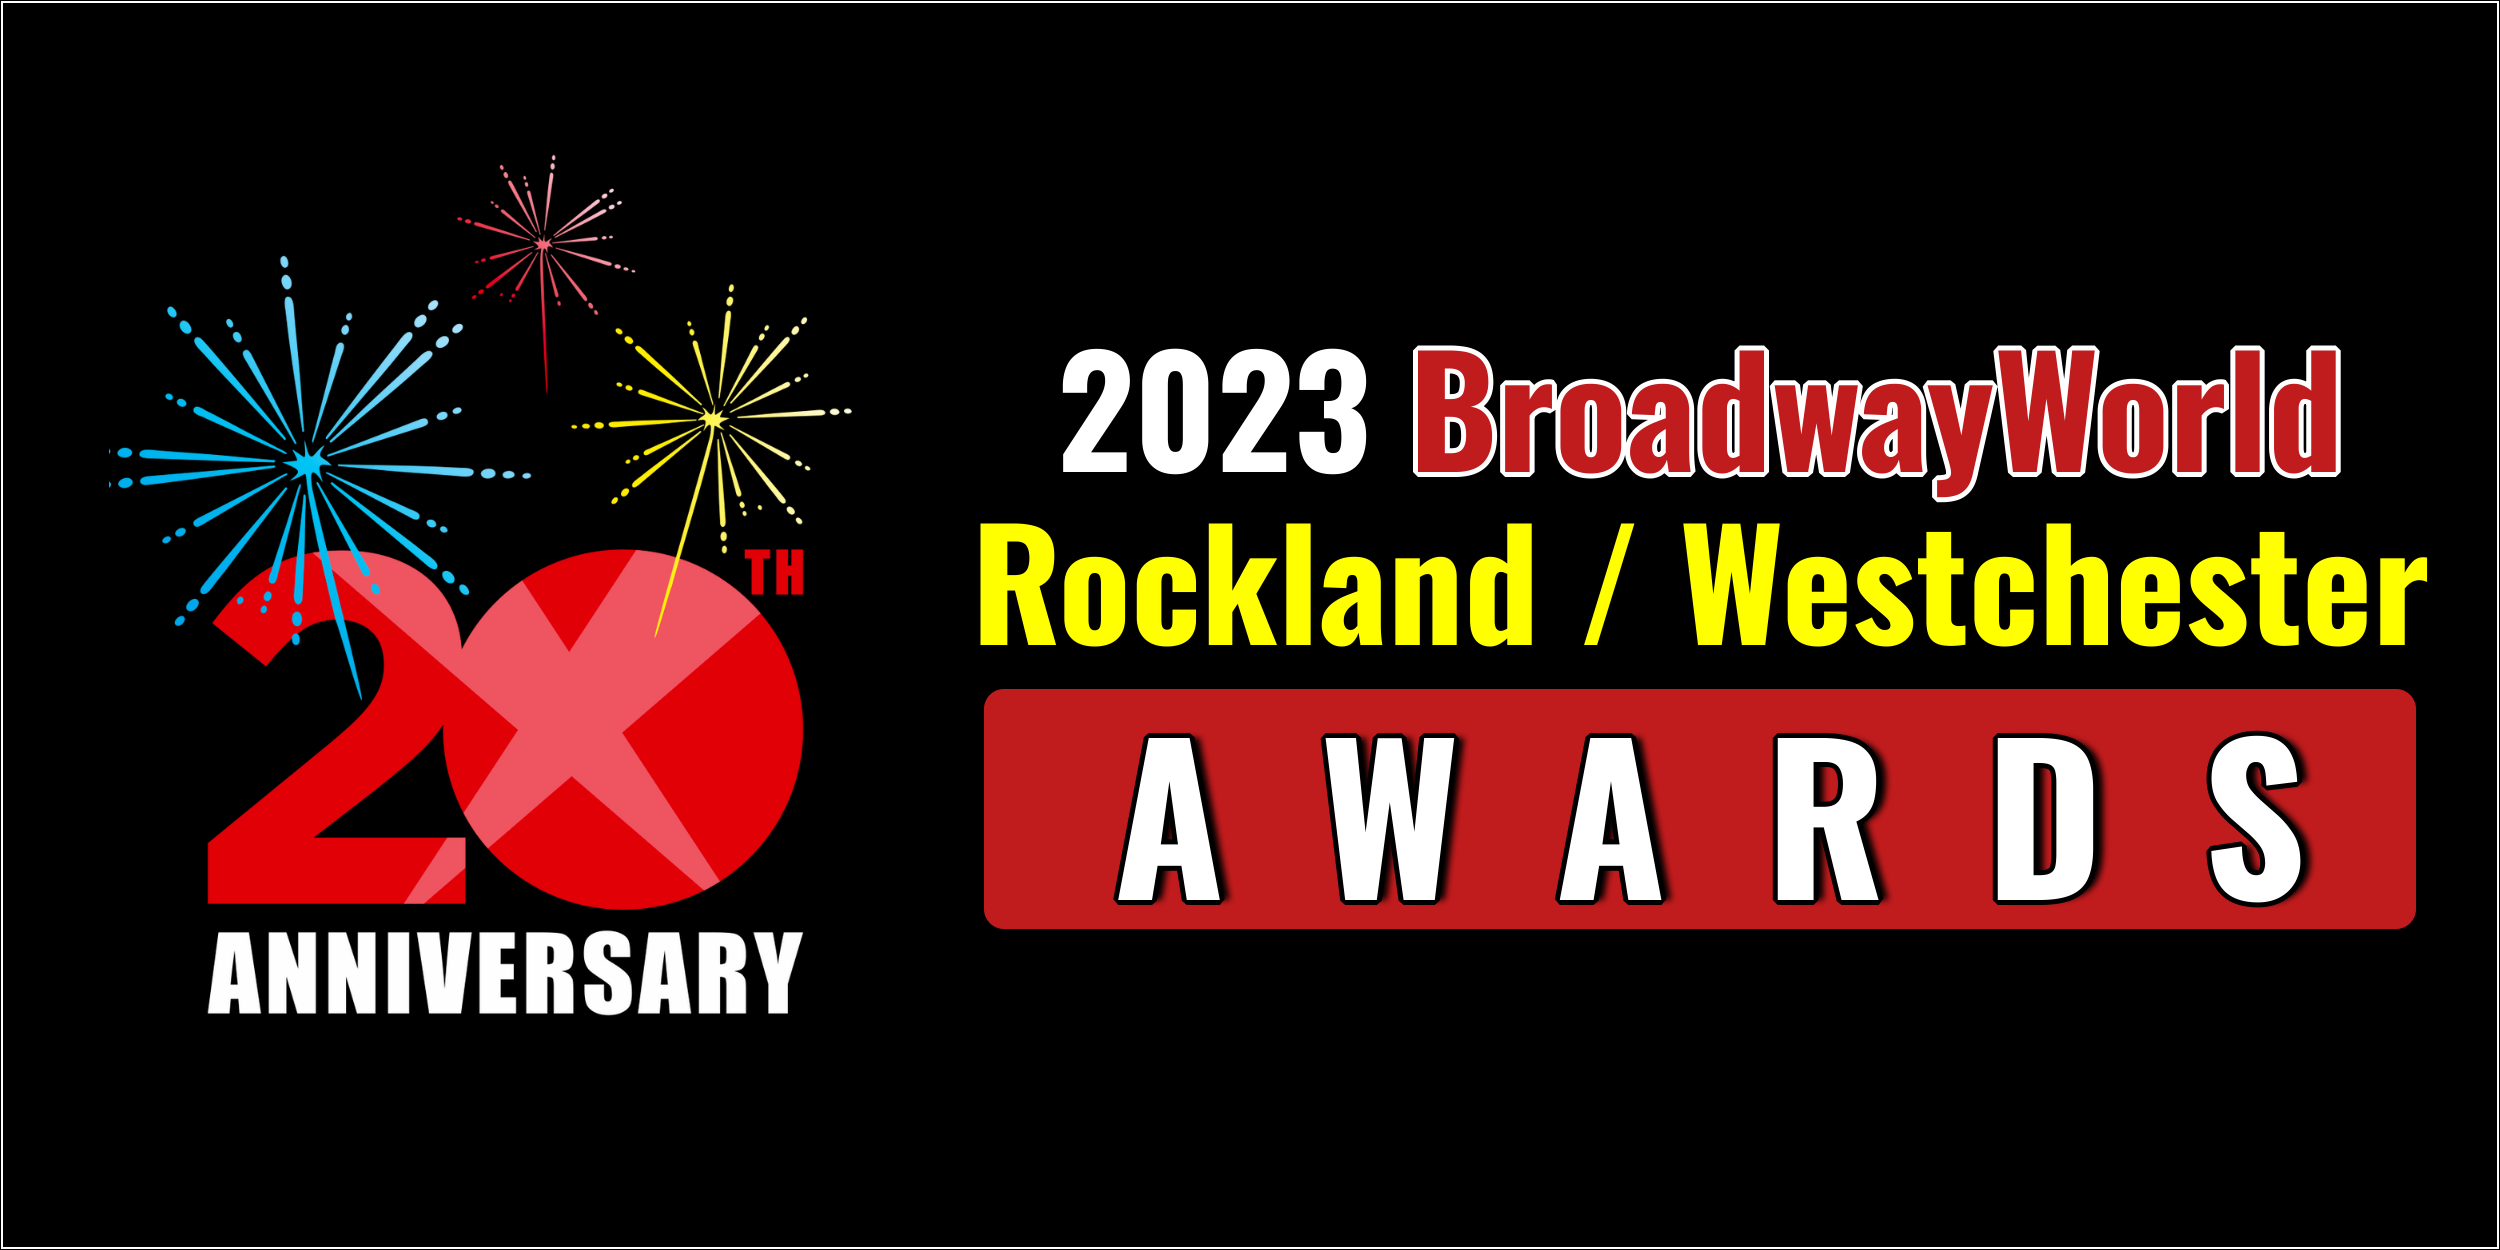 Winners Announced For The 2023 BroadwayWorld Rockland / Westchester Awards 